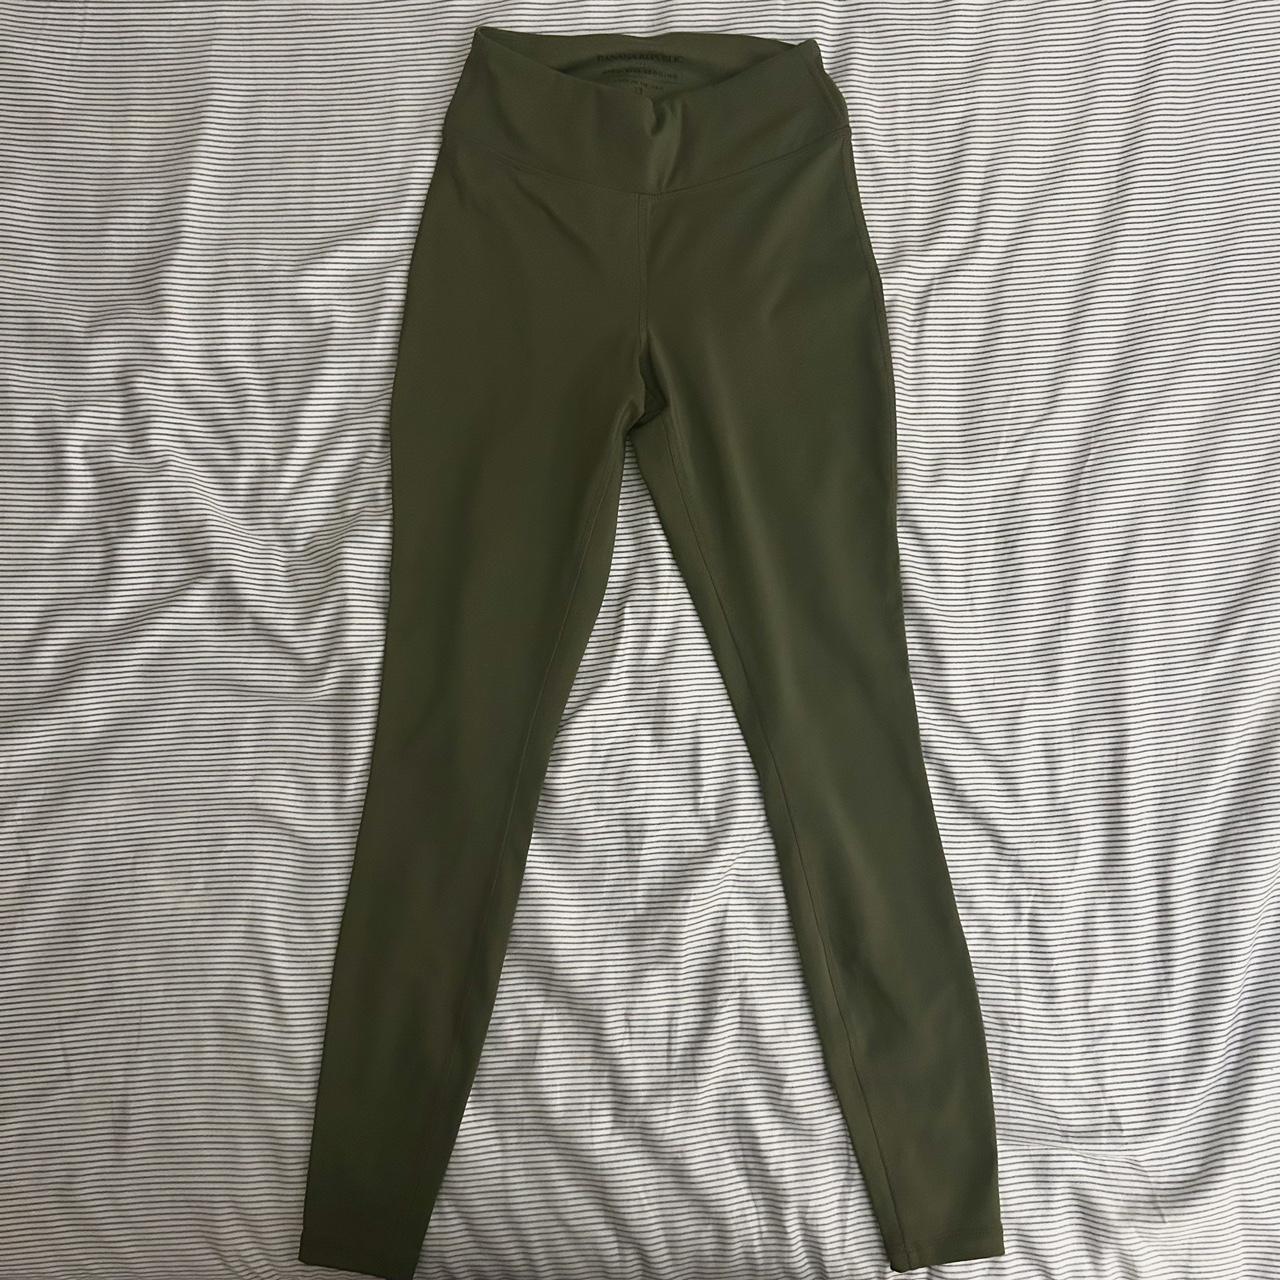 Green active leggings UNAVAILABLE FOR PURCHASE - Depop